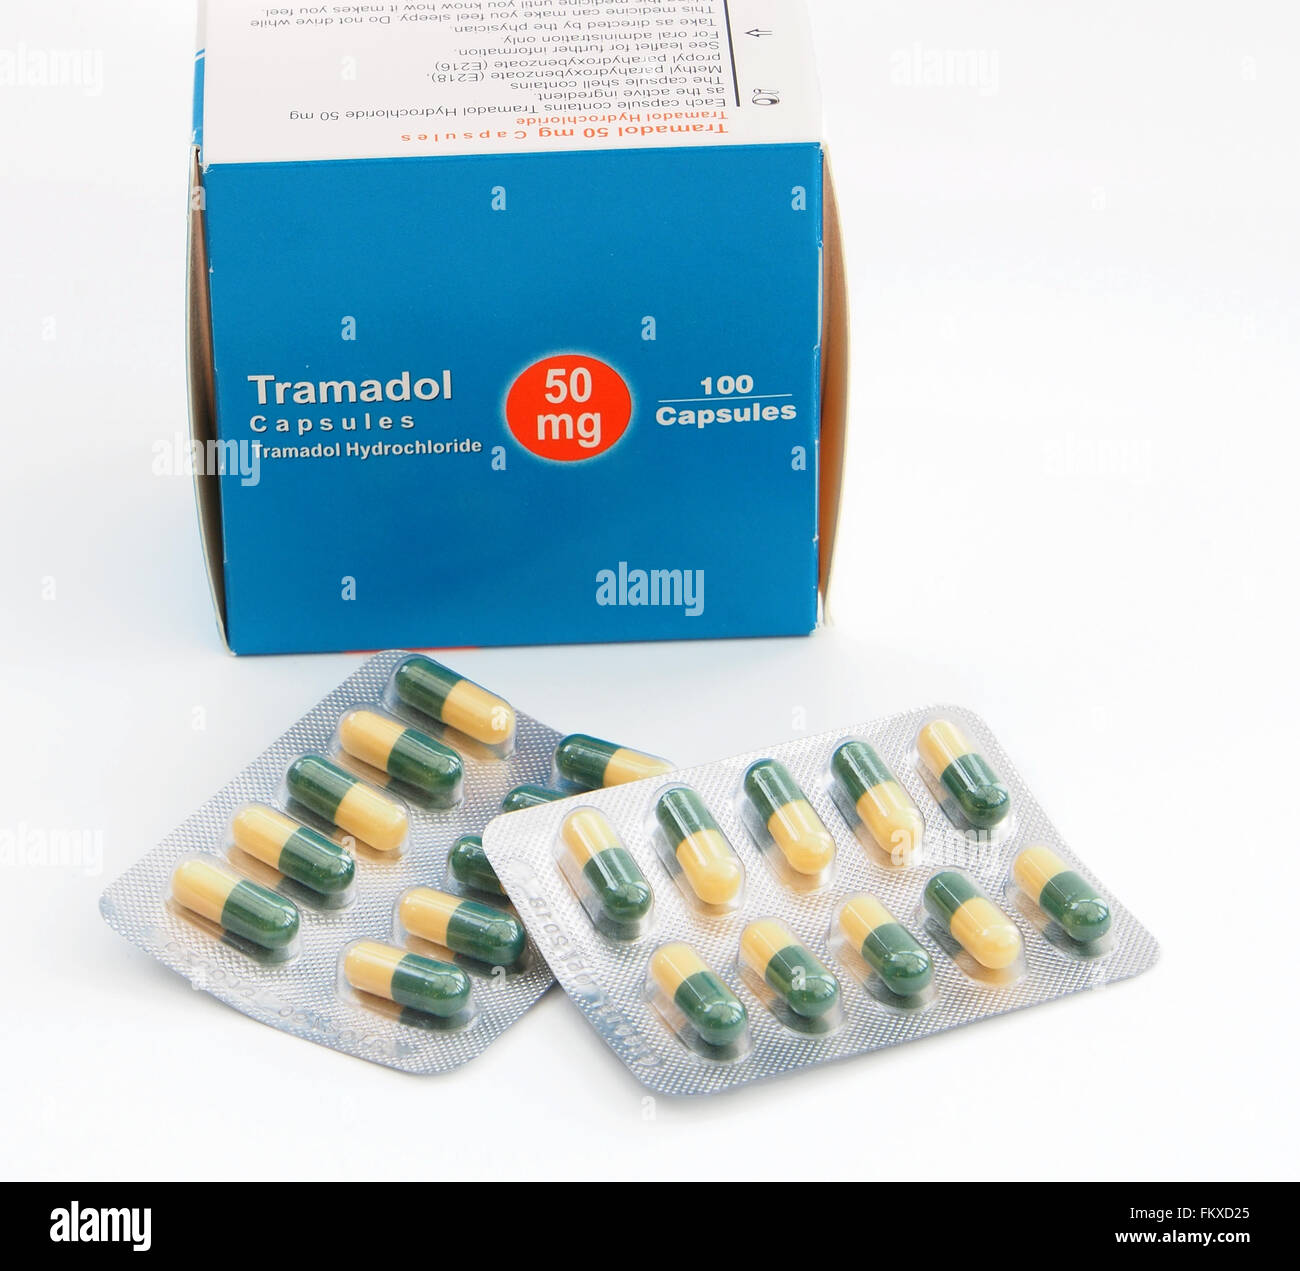 Box Of Tramadol Capsules Pain Relief Medication With The Blister Stock Photo Alamy